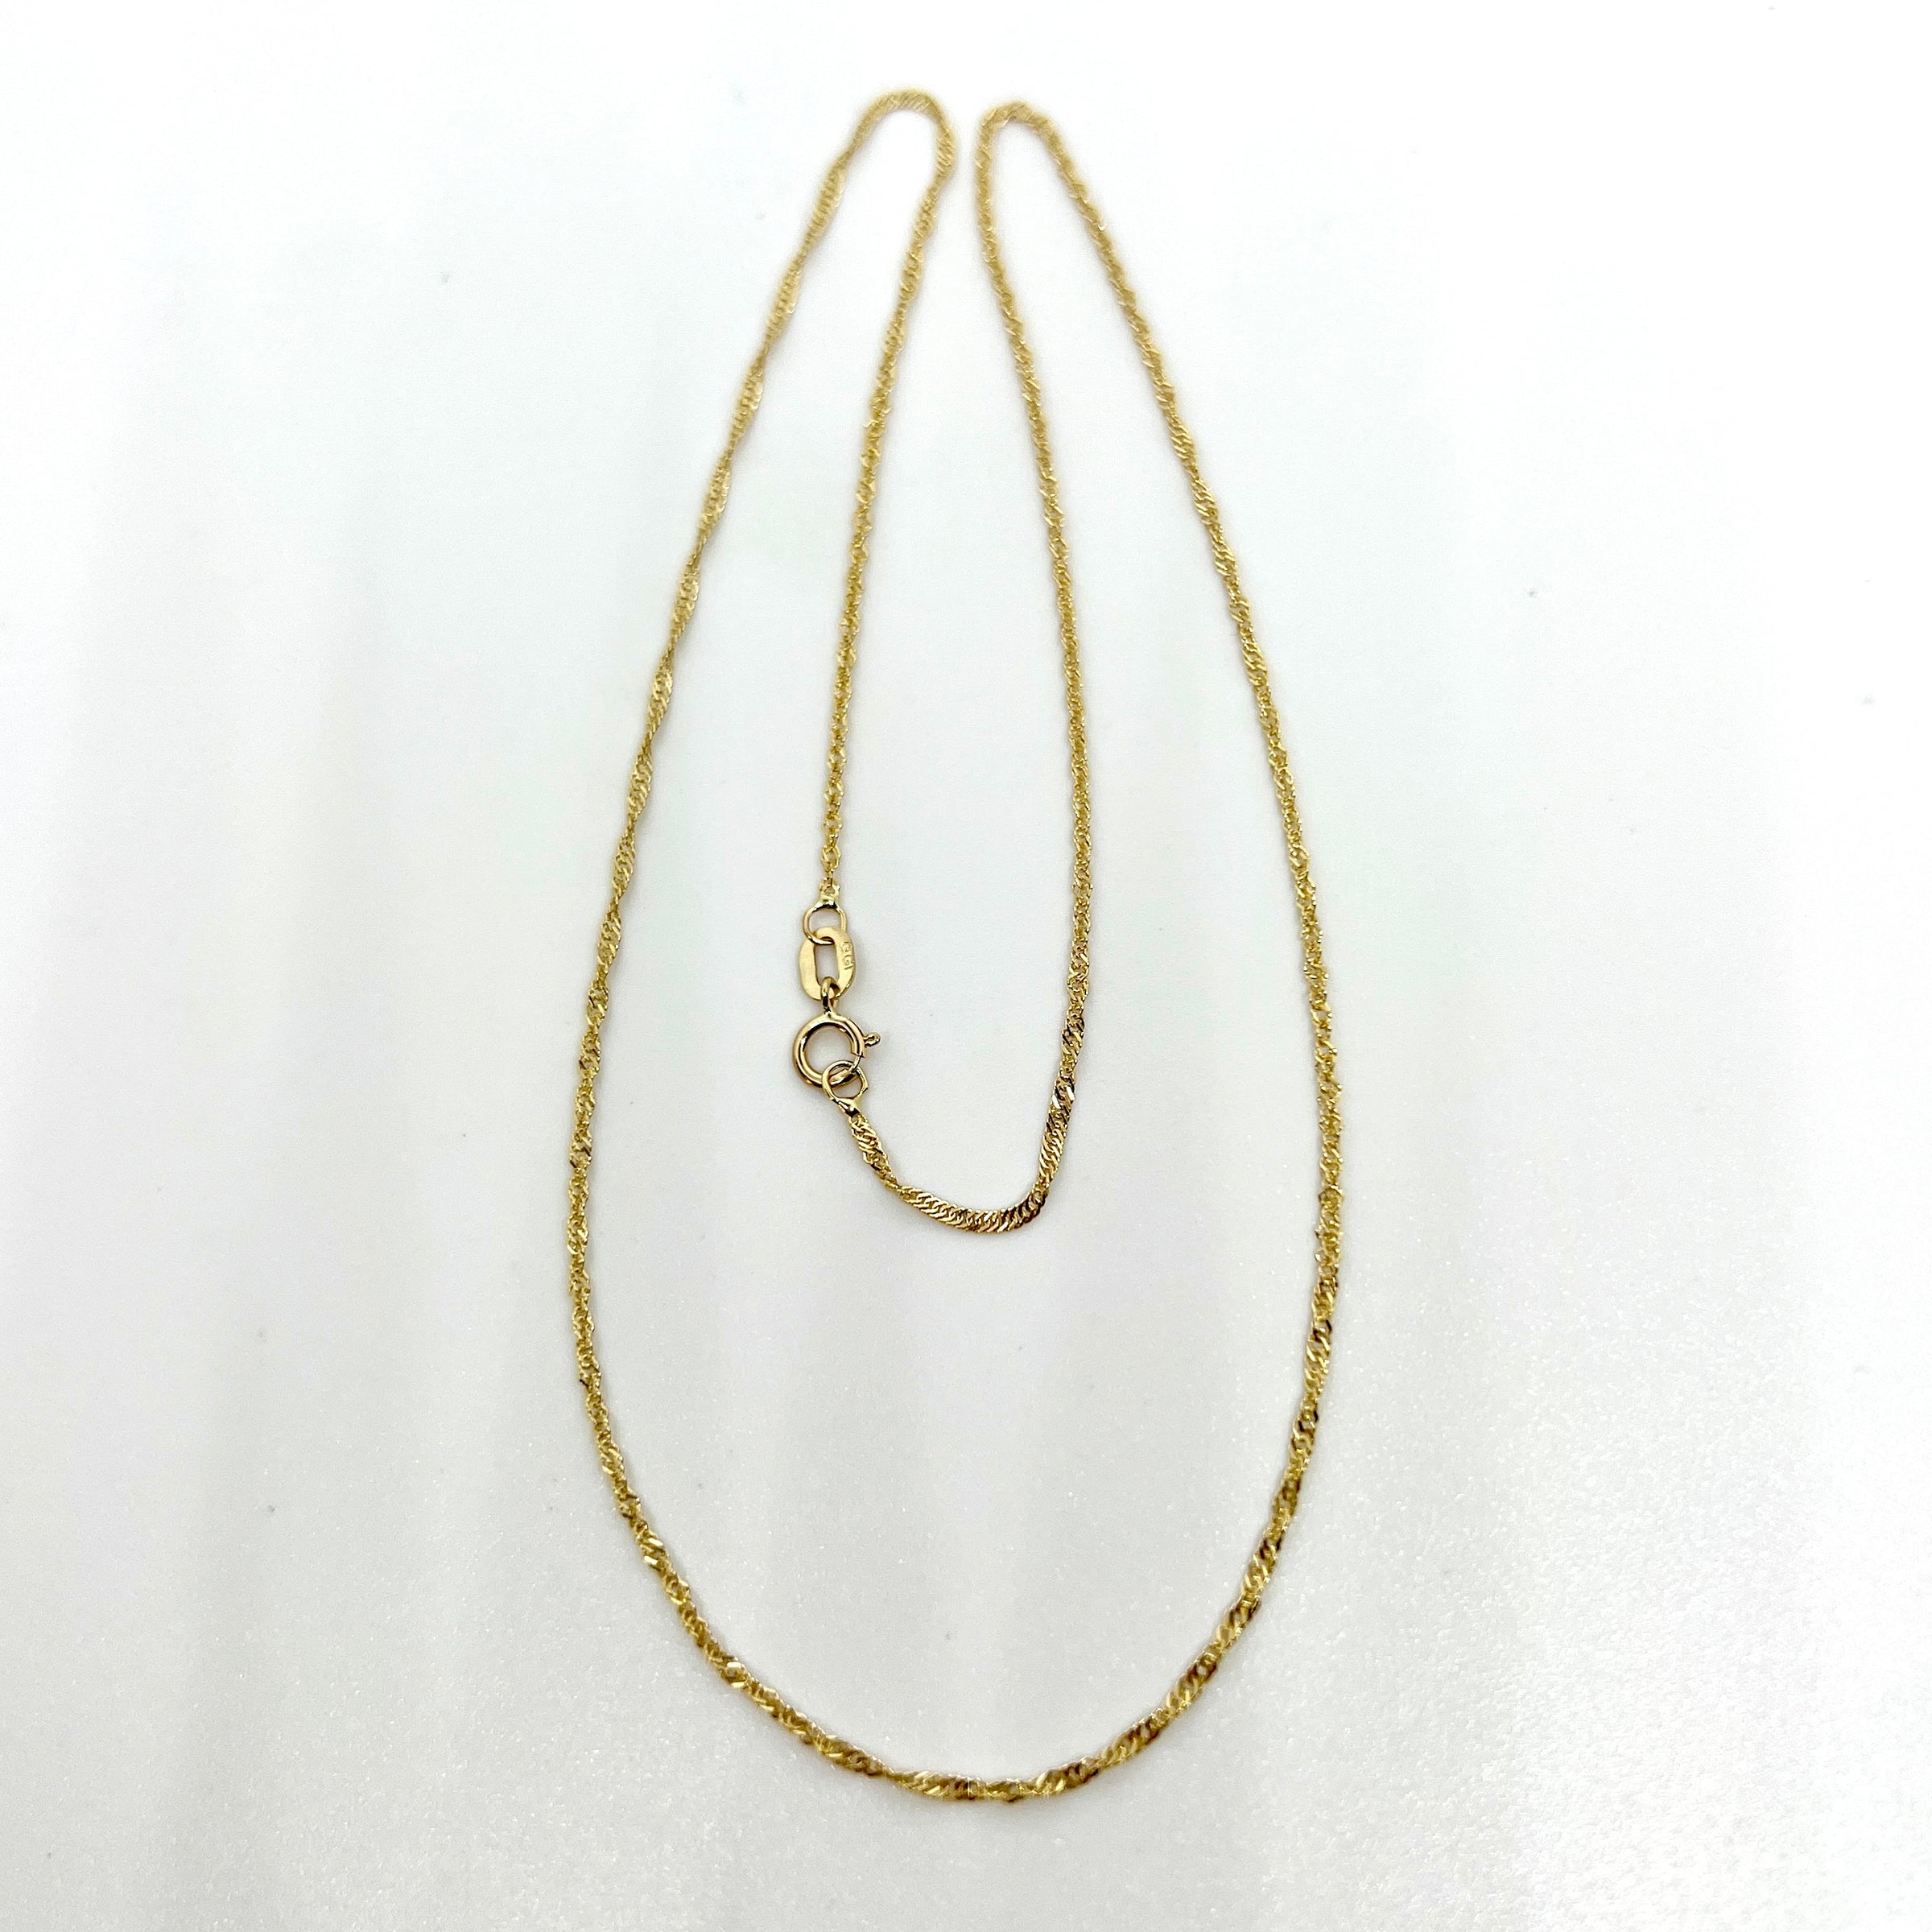 10K Yellow Gold 16” Singapore Twisted Link Chain Necklace